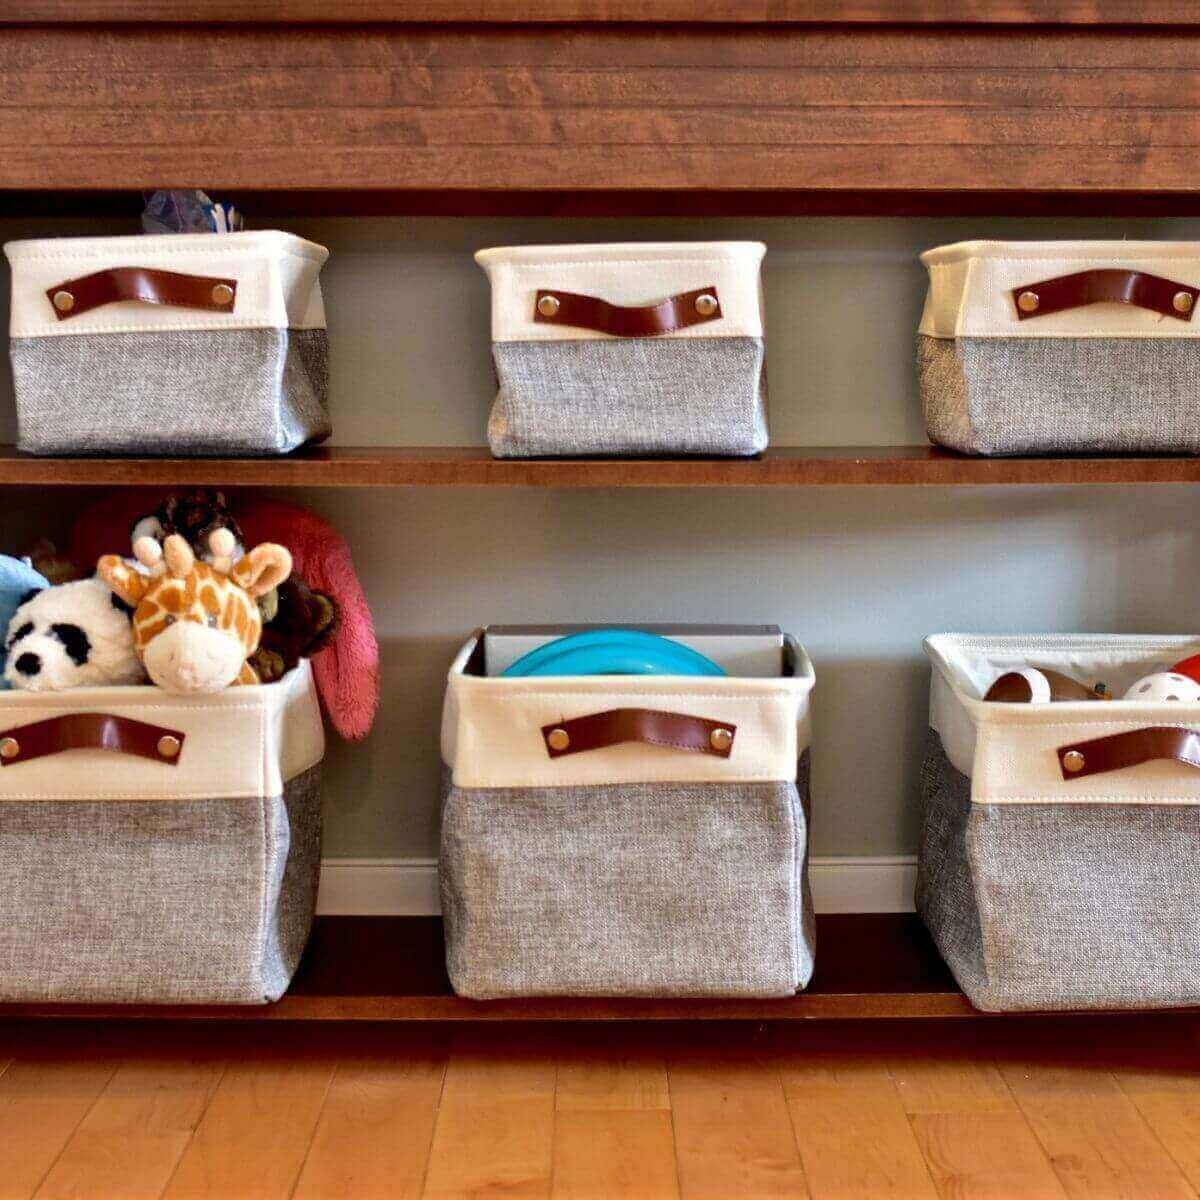 Six light grey and white cloth baskets with dark brown handles sitting on two wooden shelves filled with toys